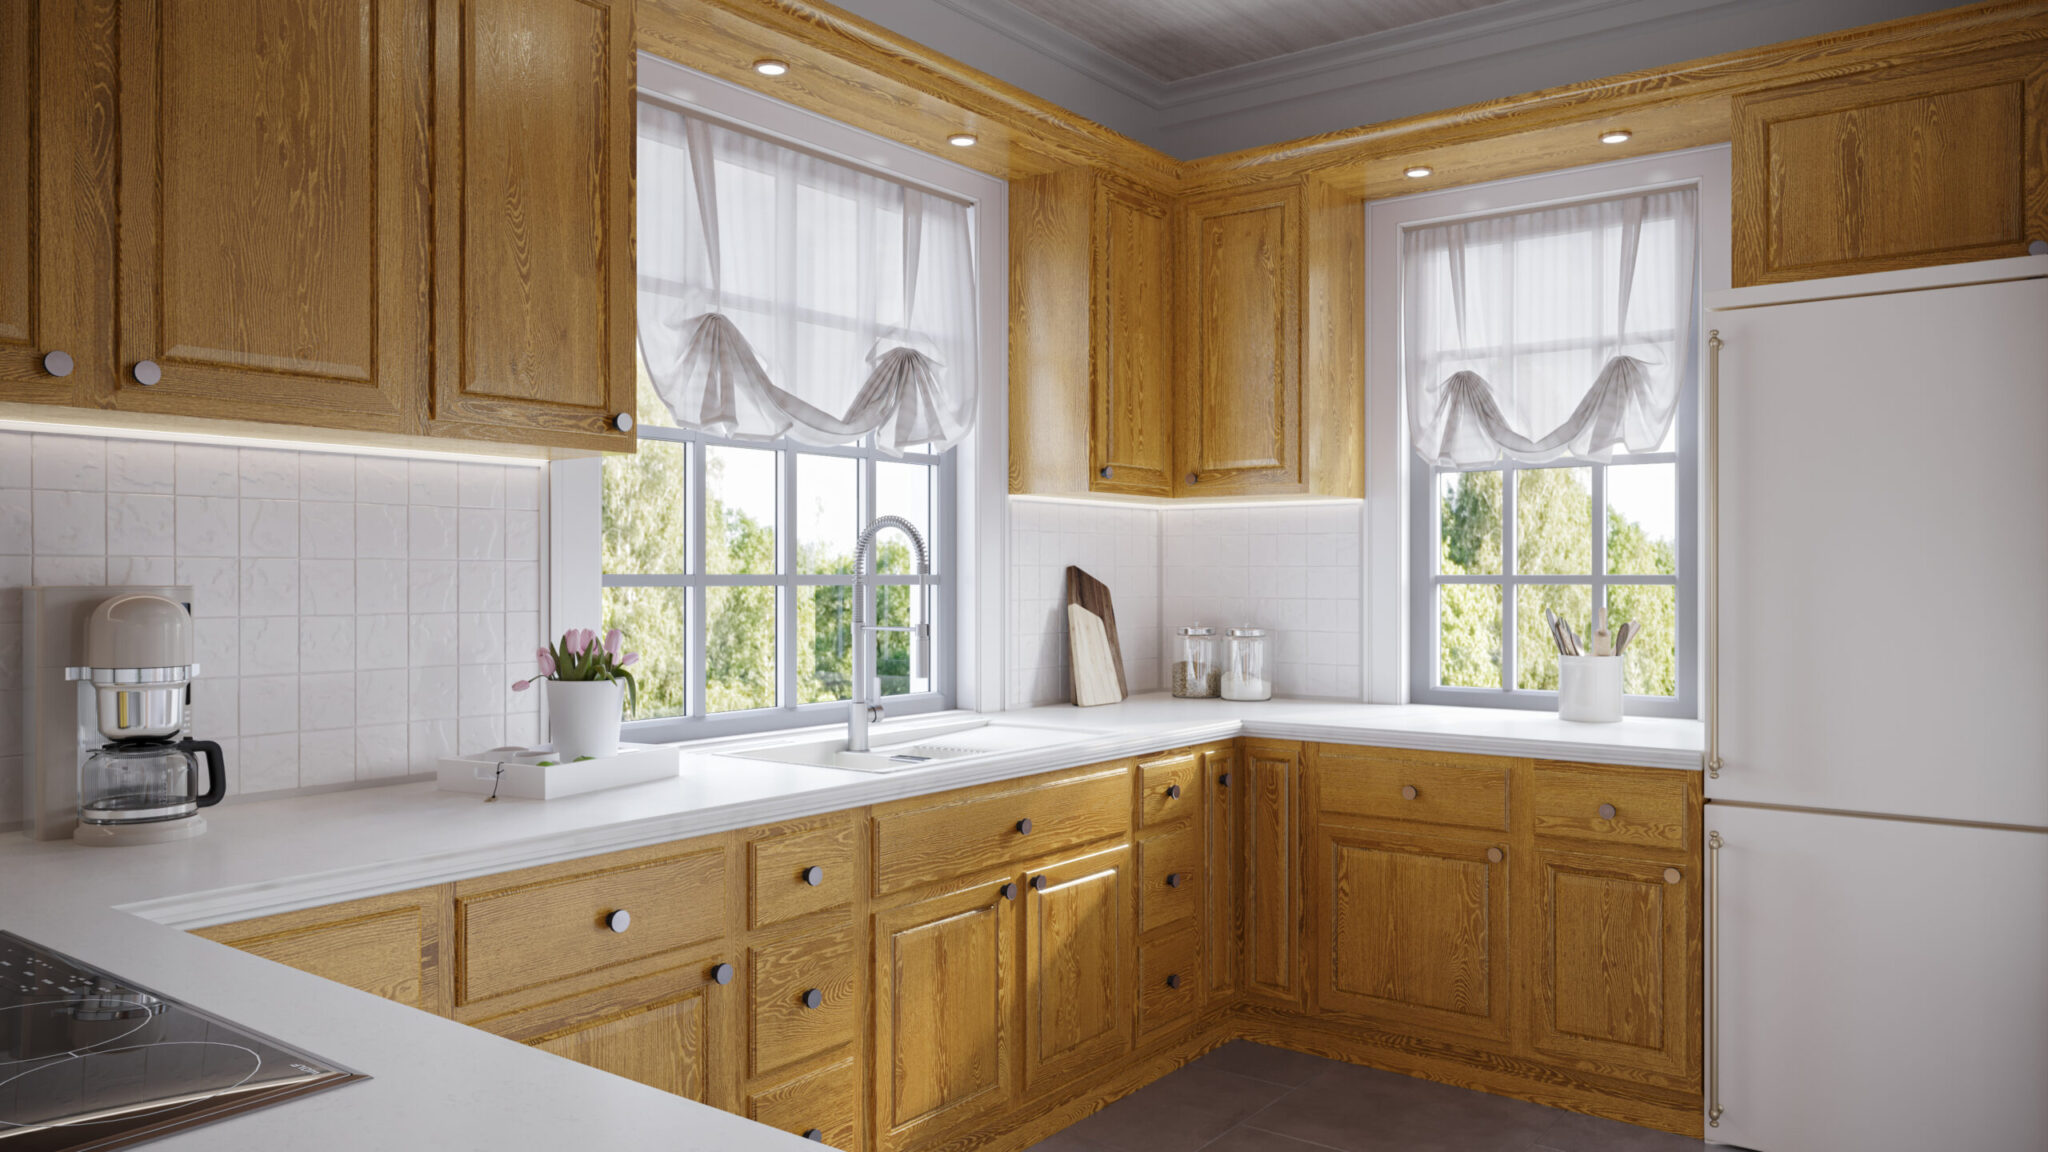 Transitional kitchen style with classic oak wall cabinets and base cabinets